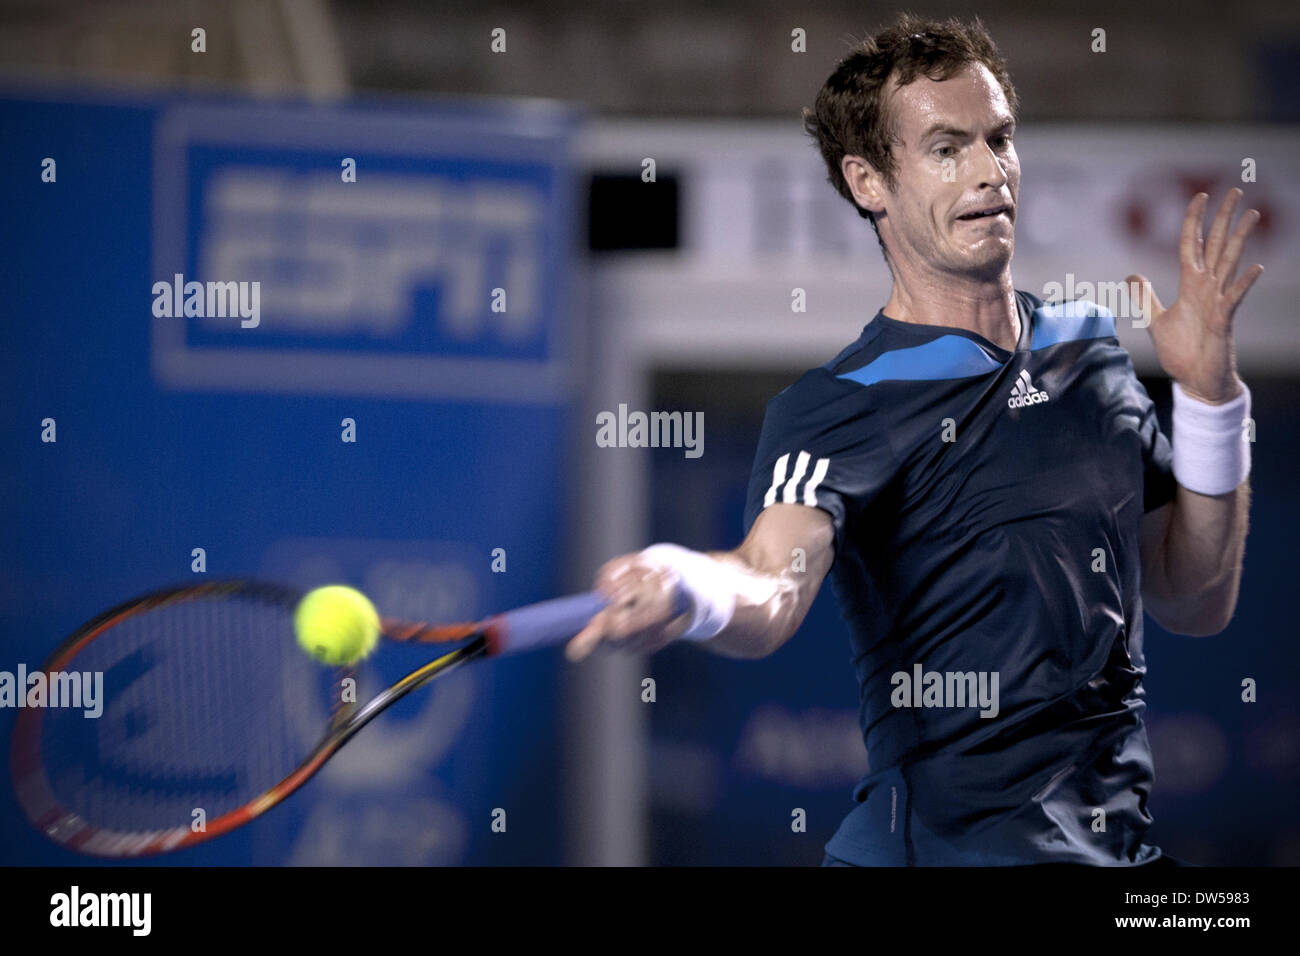 Acapulco, Mexico. 27th Feb, 2014. Andy Murray of Britain returns the ball  to Gilles Simon of France during a men's singles quarterfinal at the  Mexican Open tennis tournament in Acapulco, Mexico, on